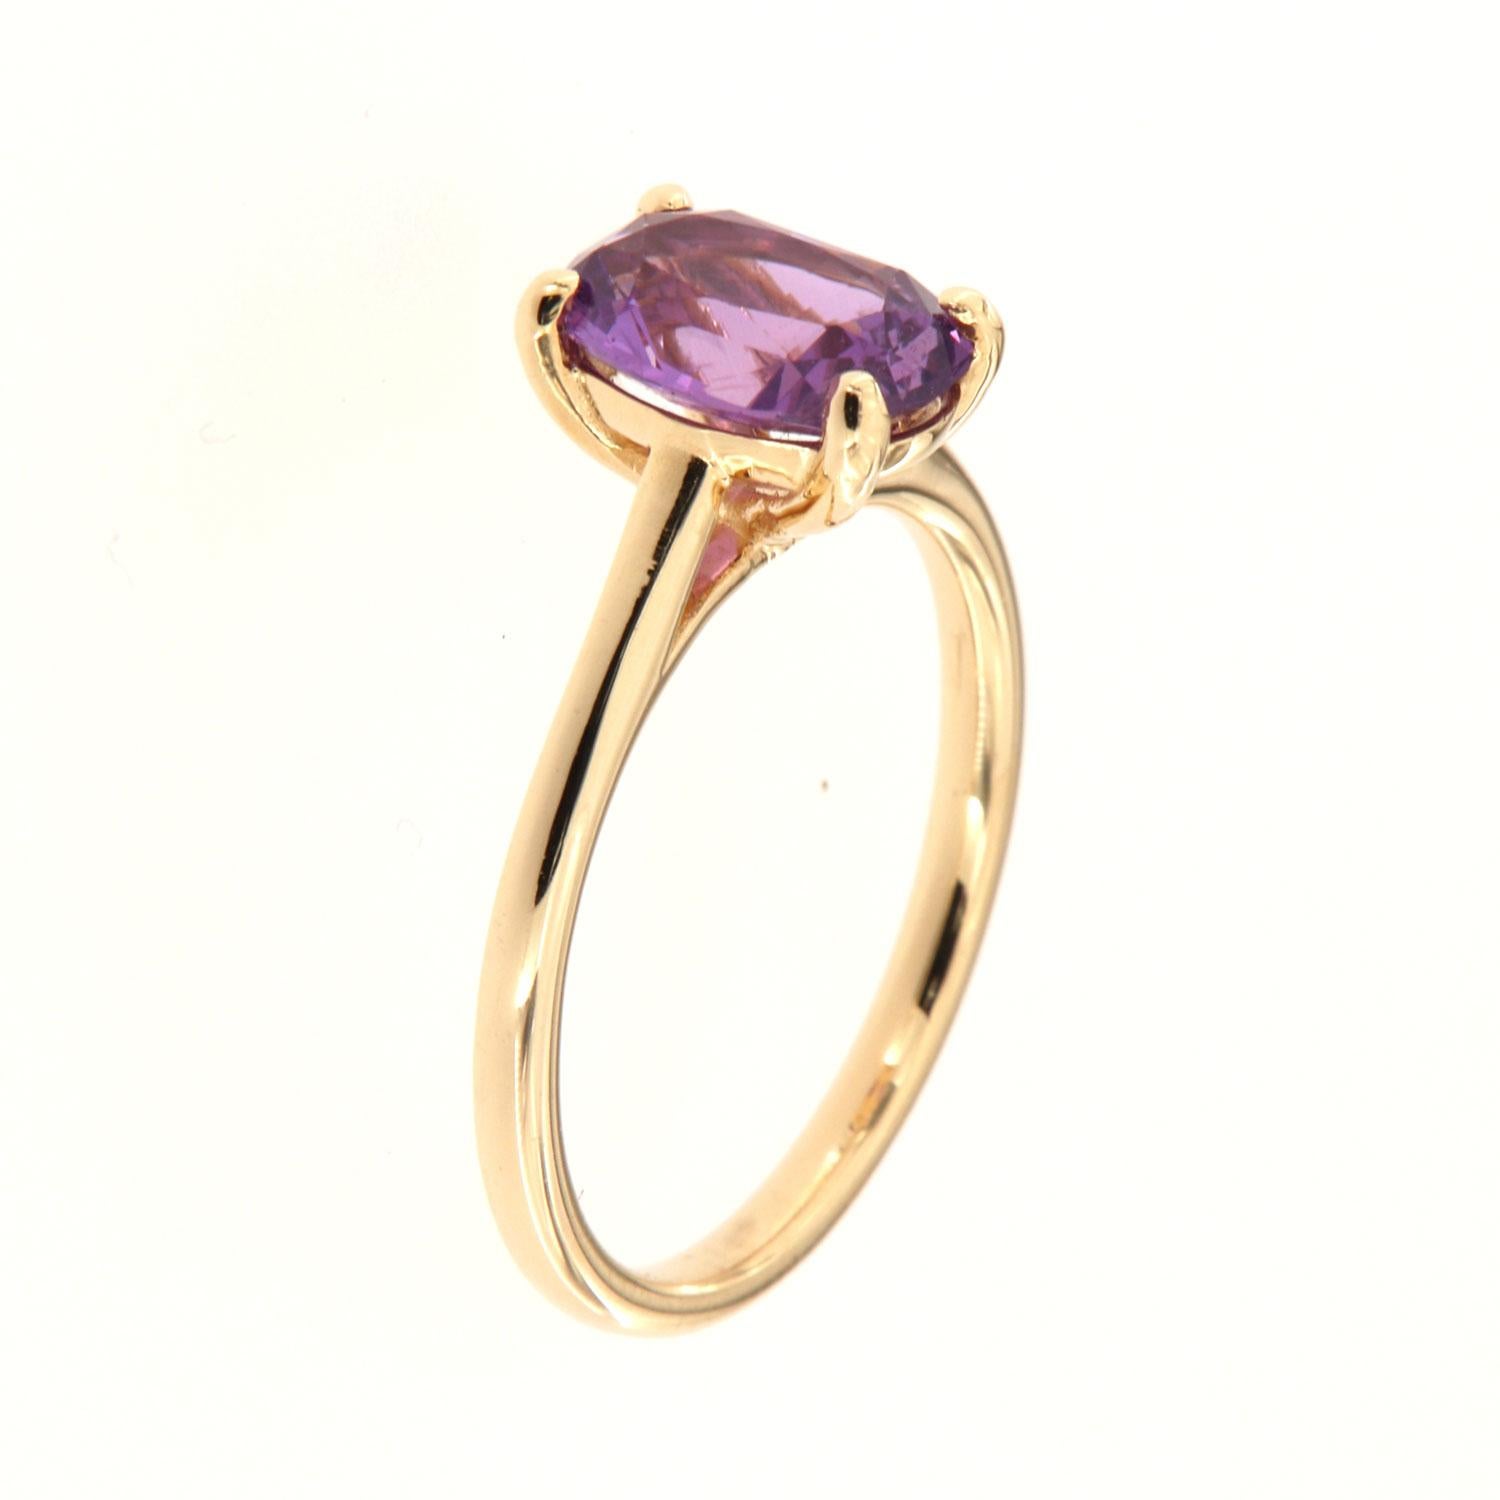 This 14k yellow gold solitaire ring features an Oval shape 1.79-carat Non-Heated Natural Pink-Purple Sapphire four prong set on a 1.7 mm wide band. The sapphire exhibits an excellent luster. It is GIA certified number. 6214628502 
The ring size is